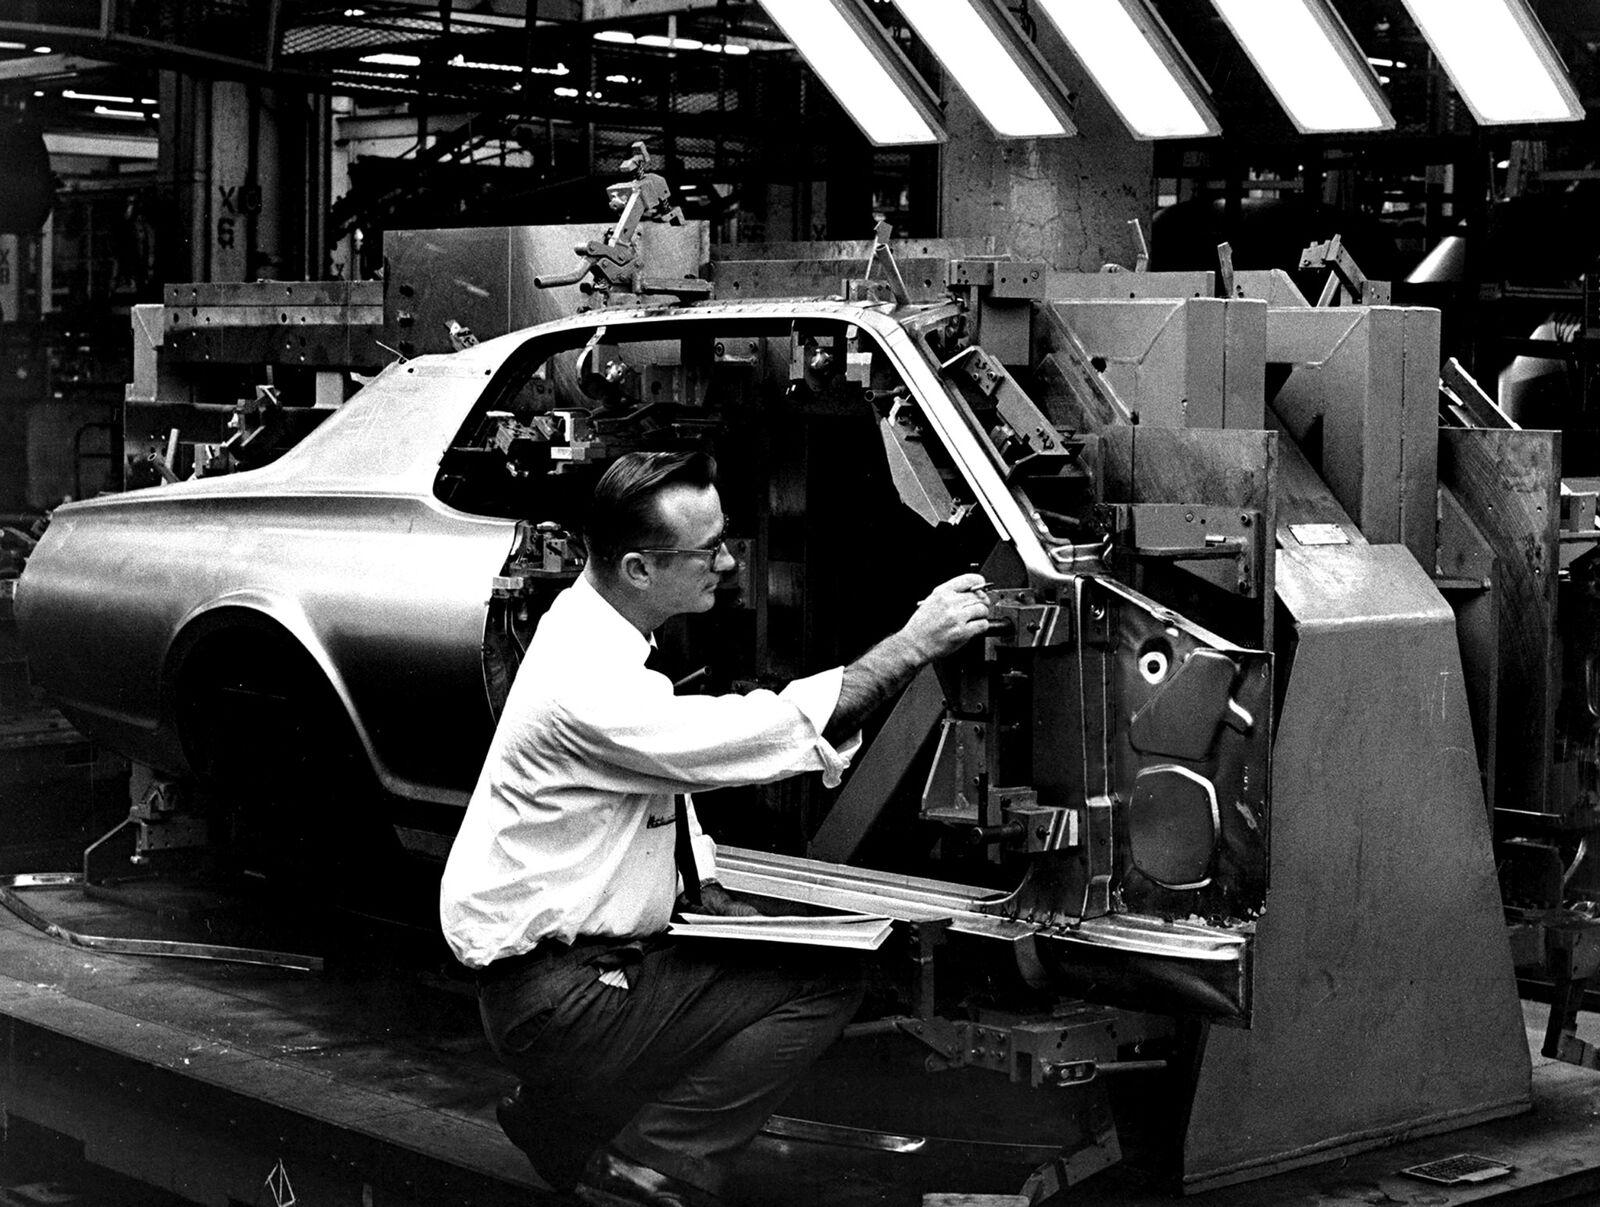 1967 MERCURY COUGAR ASSEMBLY LINE PHOTO  (179-f)